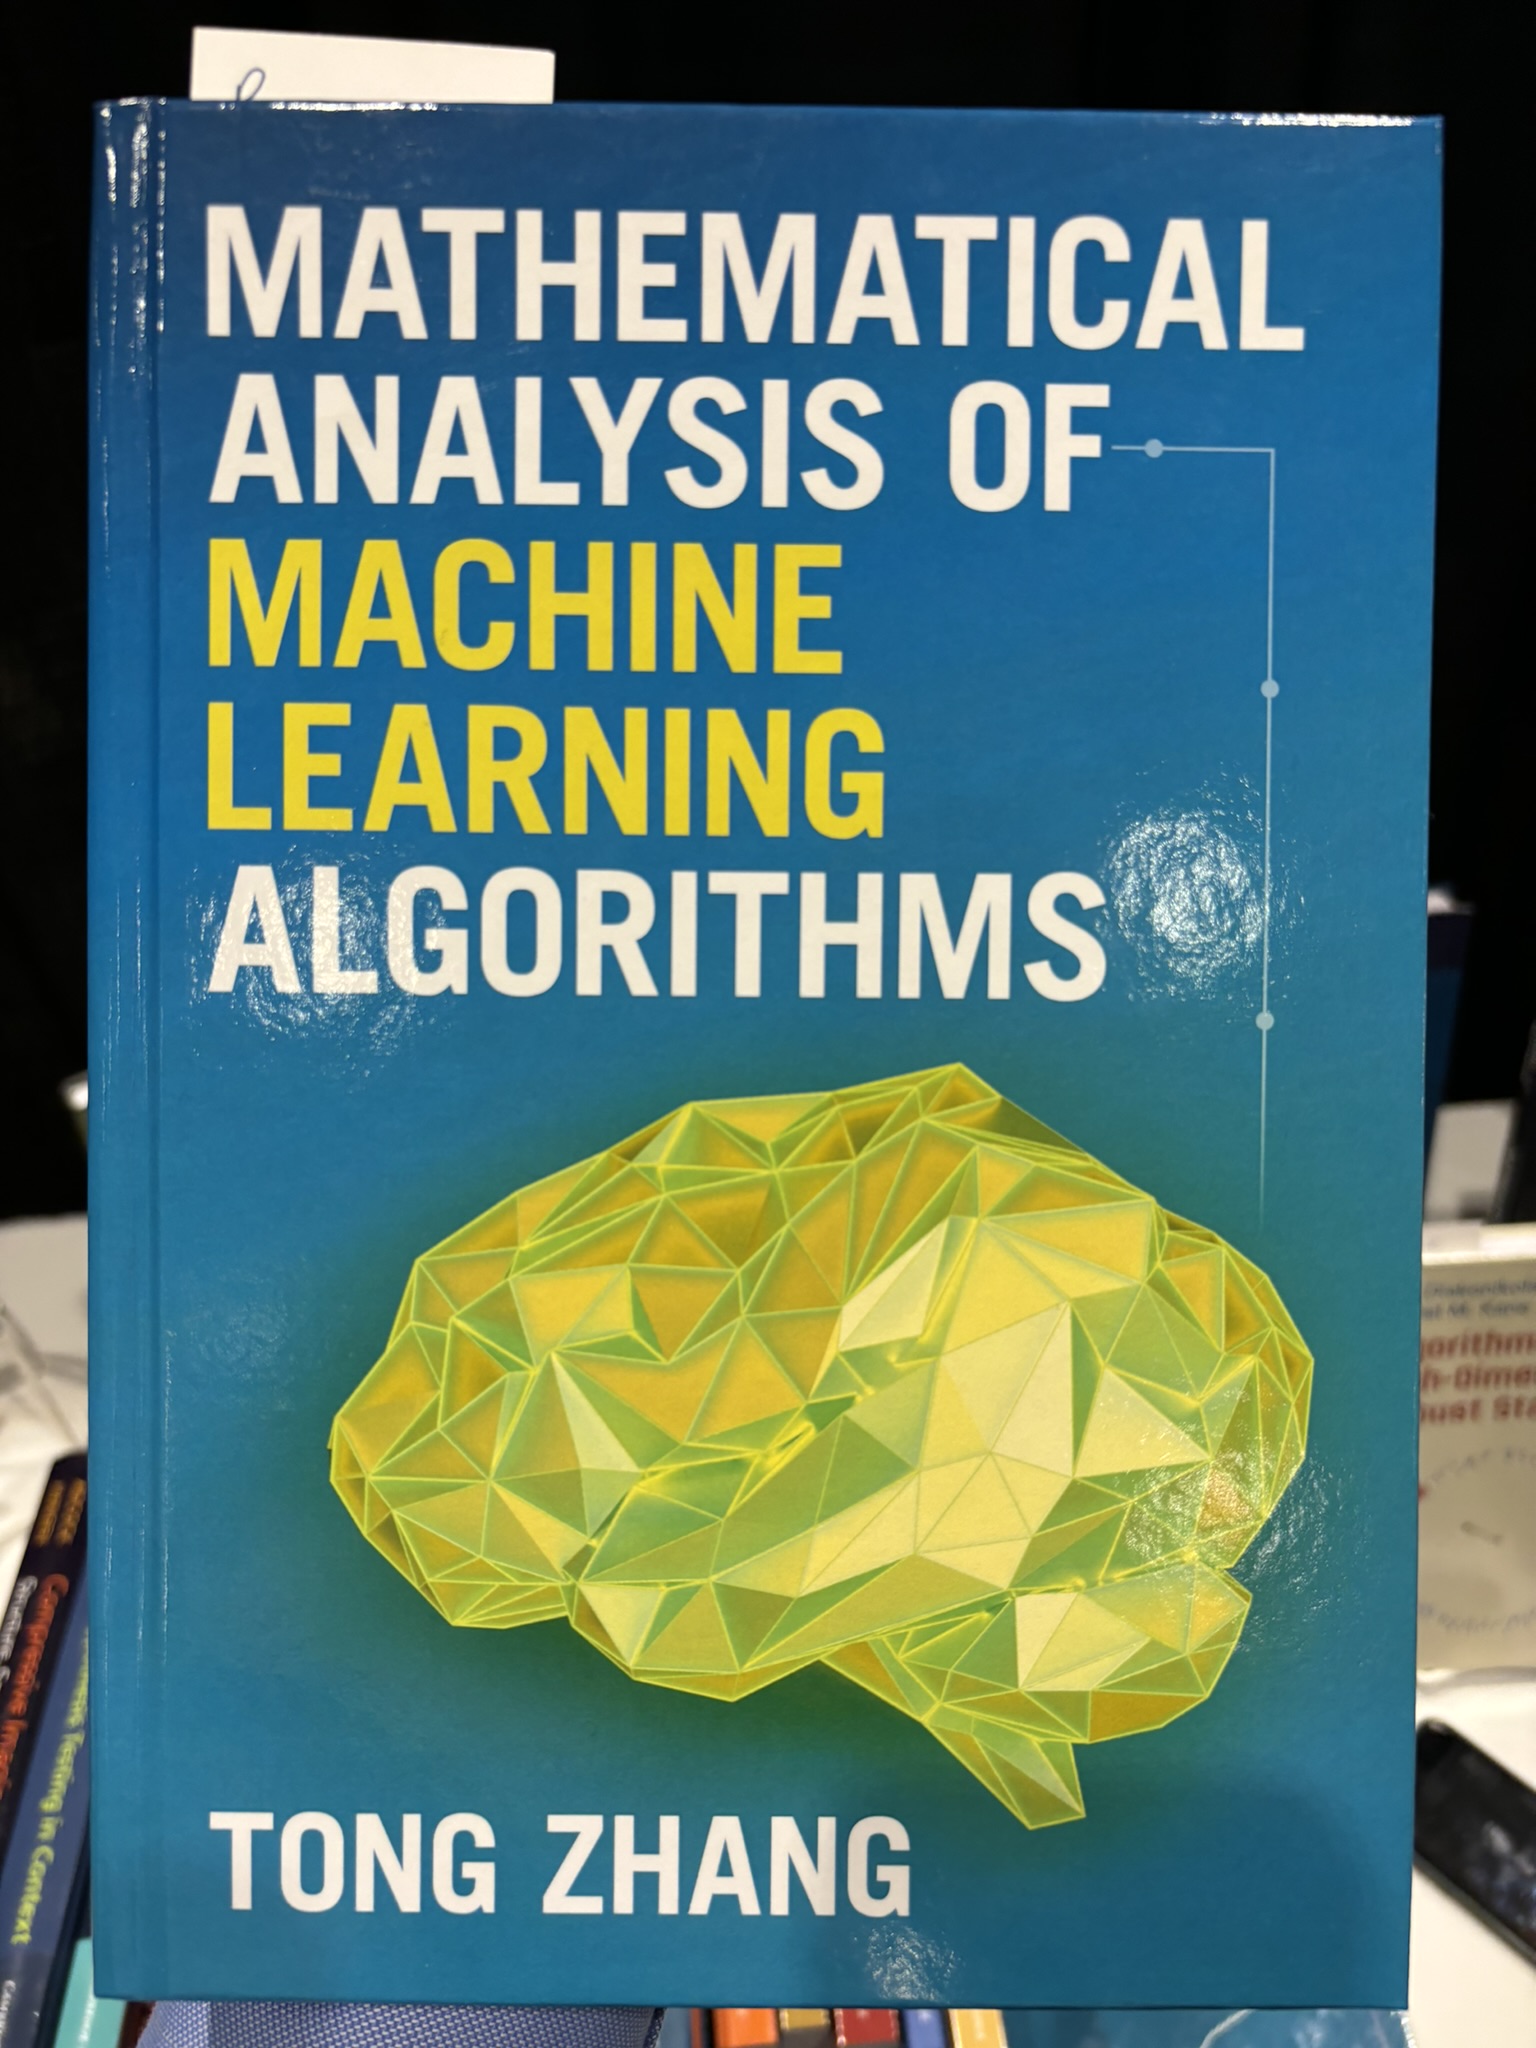 Mathematical analysis of machine learning algorithms